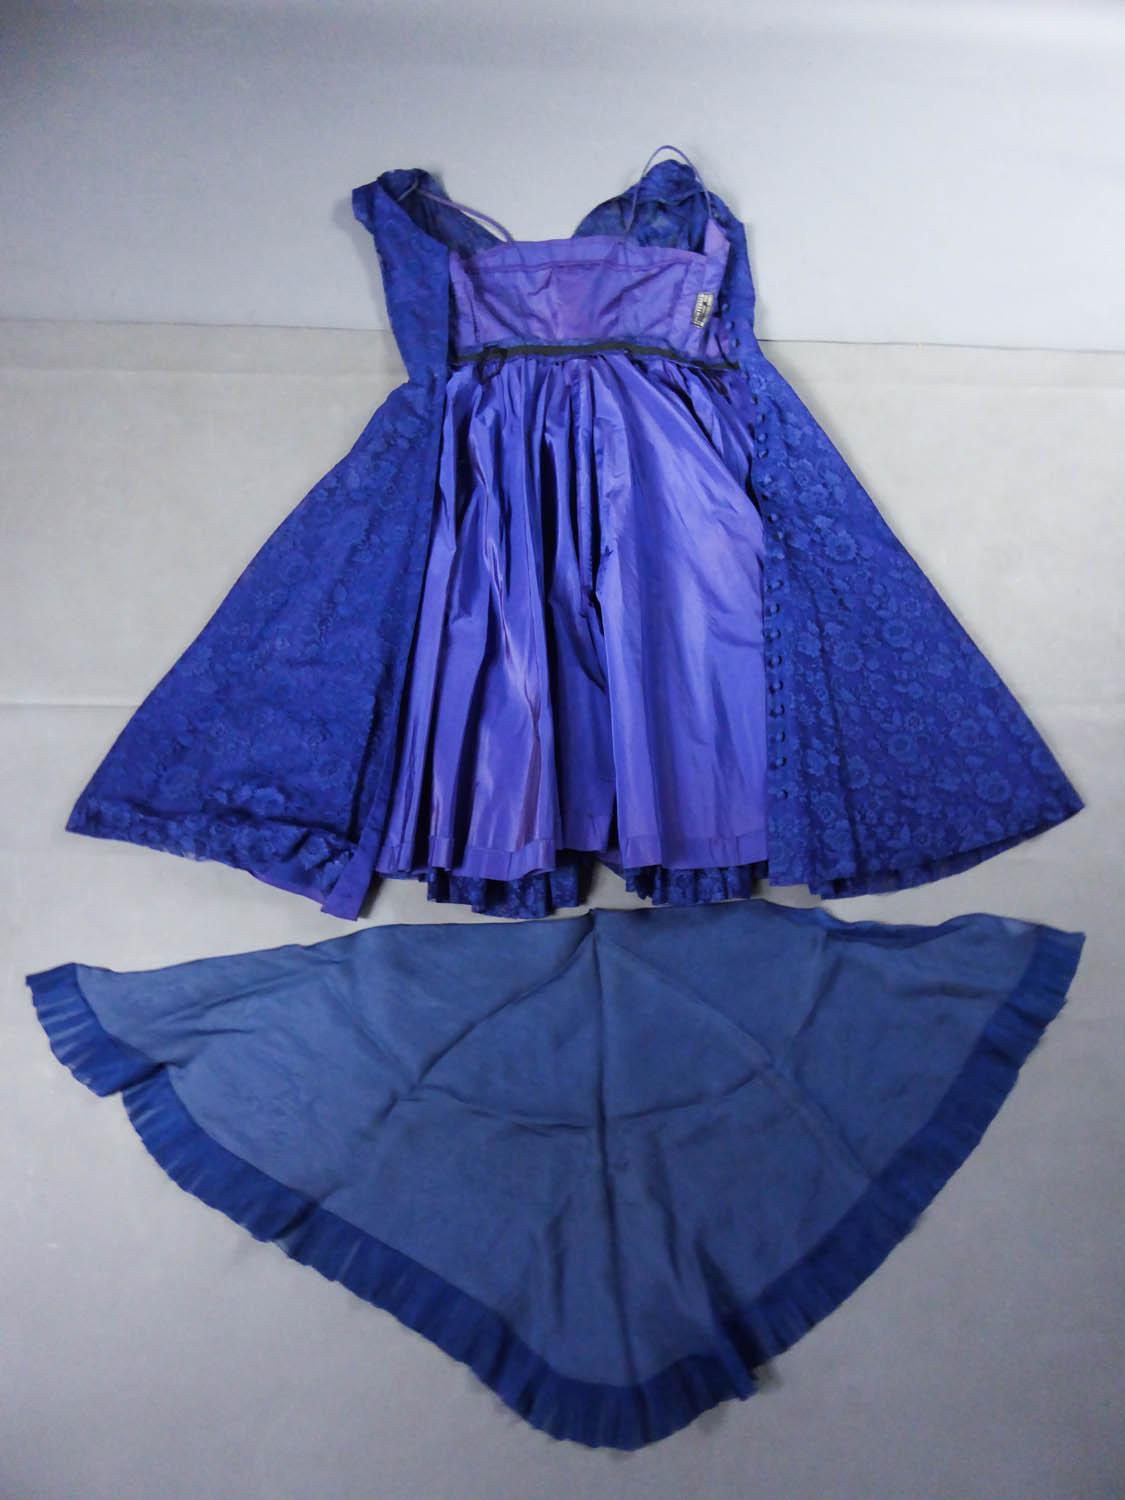 Circa 1950
France

A Louis Féraud Haute Couture dress in Calais lace with large bouquets of navy blue flowers dating from the early 50s. Dress with flared corolle skirt from the waist with a navy blue tulle underskirt and a purple taffeta slip